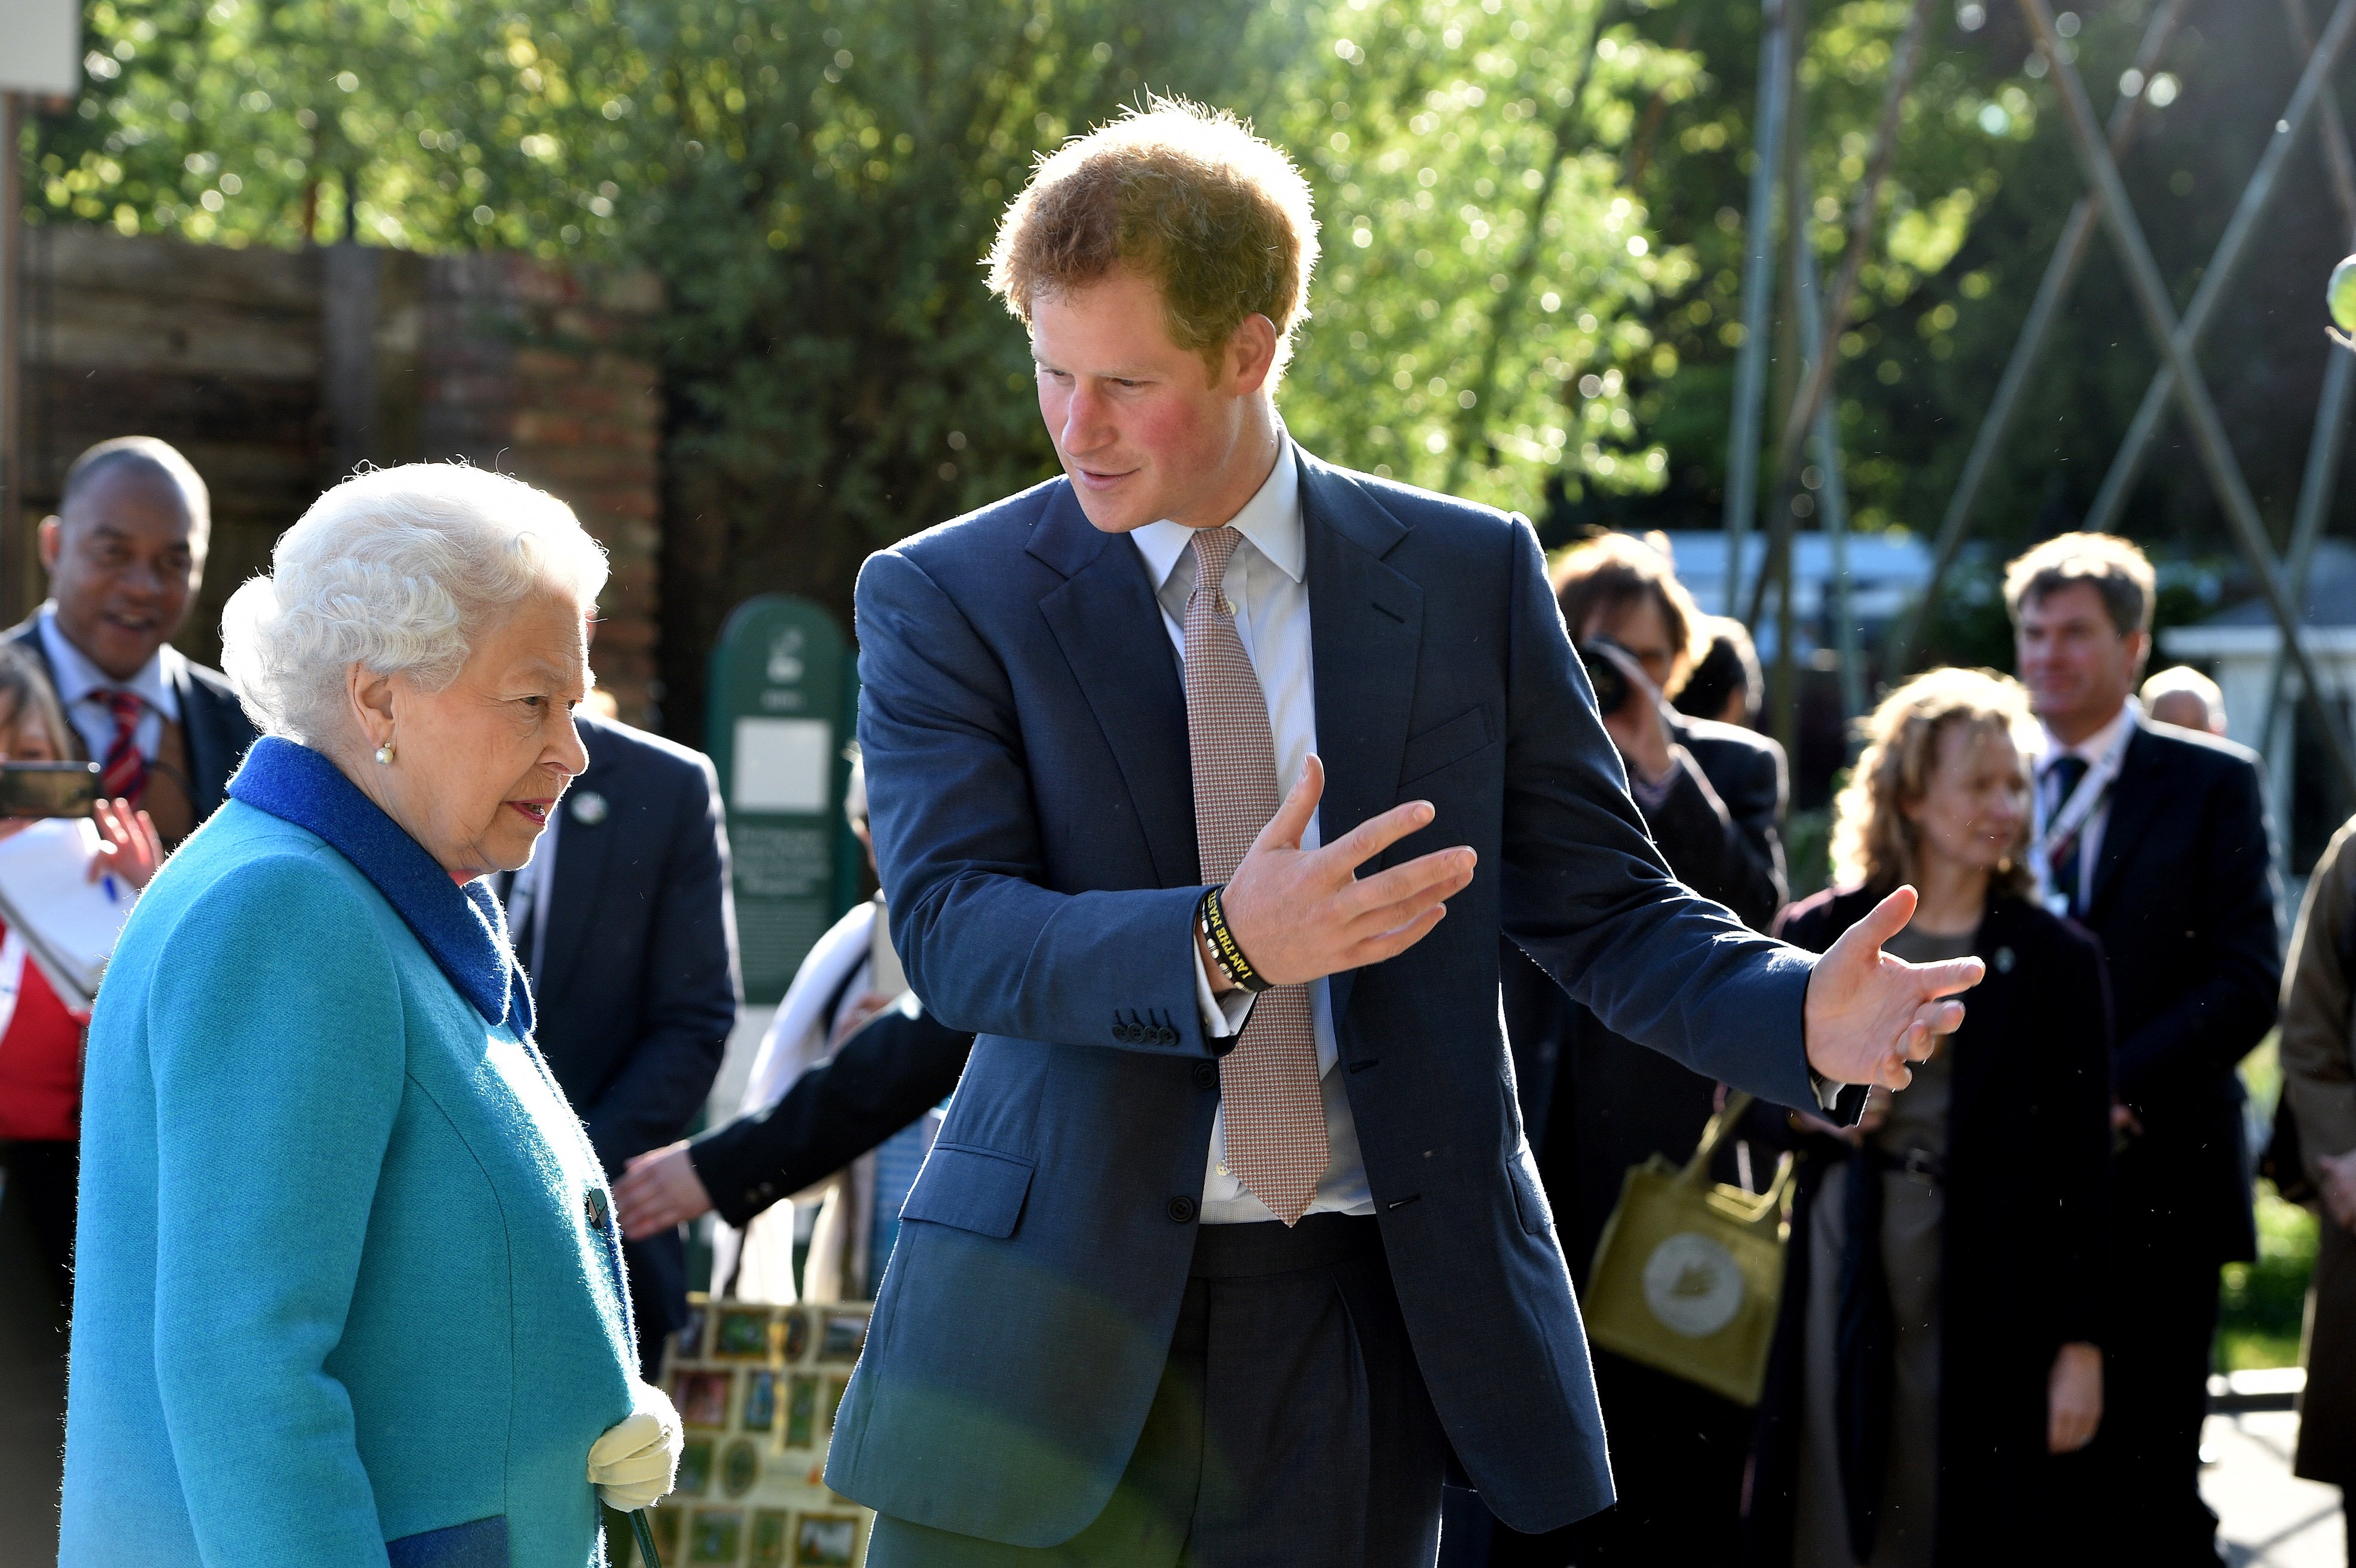 Prince Harry Became ‘Defensive’ About Queen Elizabeth During His Interview Says Body Language Expert